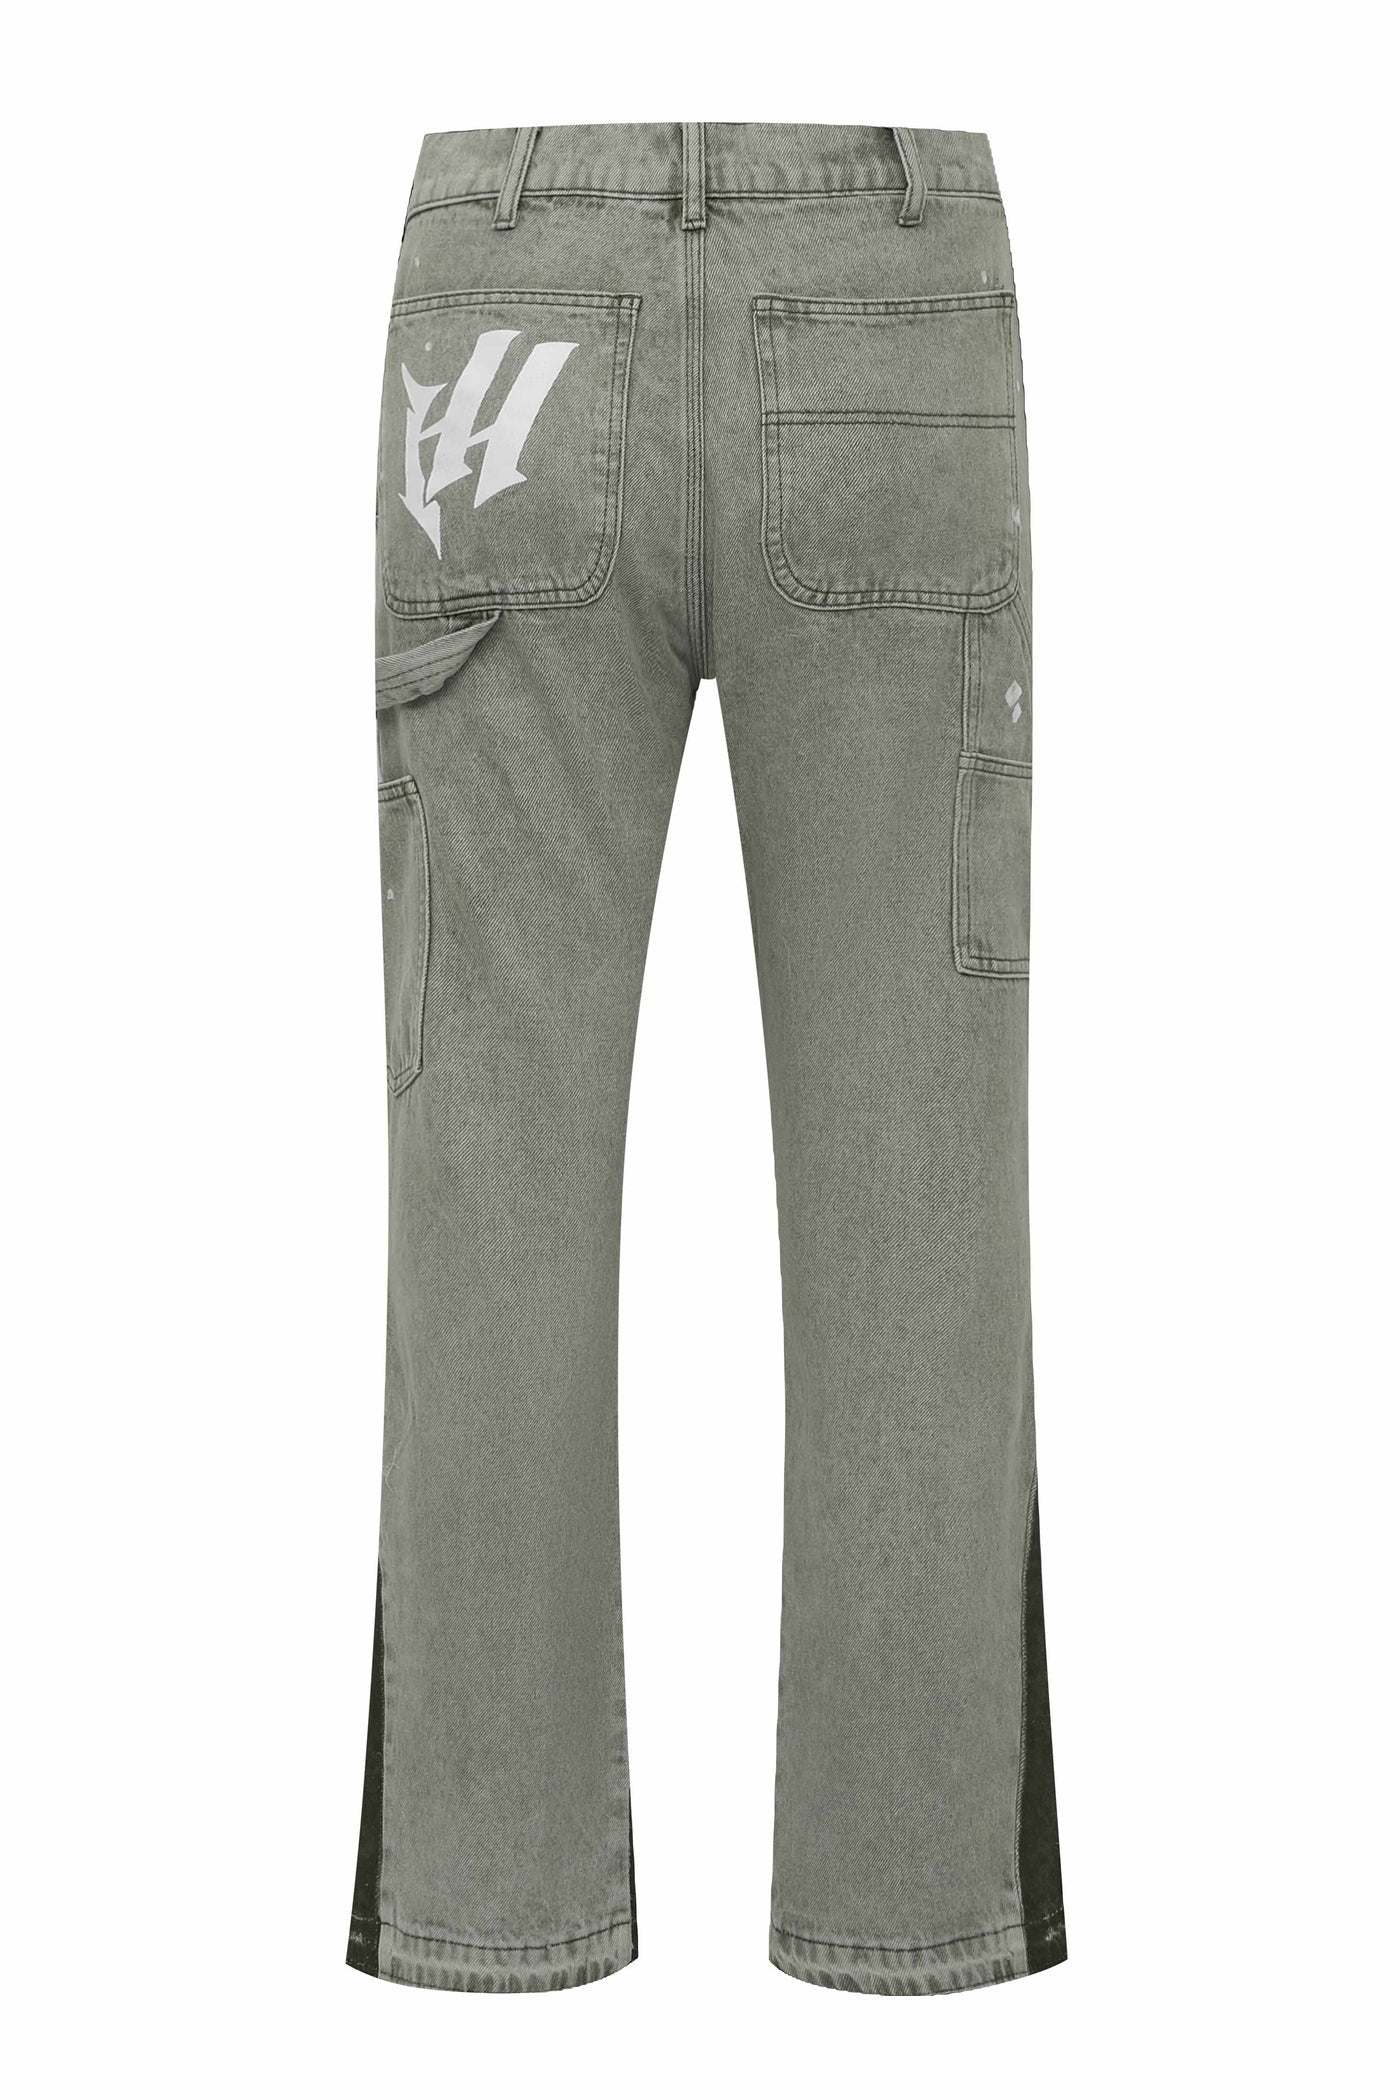 HOLLYWOOD HIDEOUT PALE GREEN VALKYRE JEANS